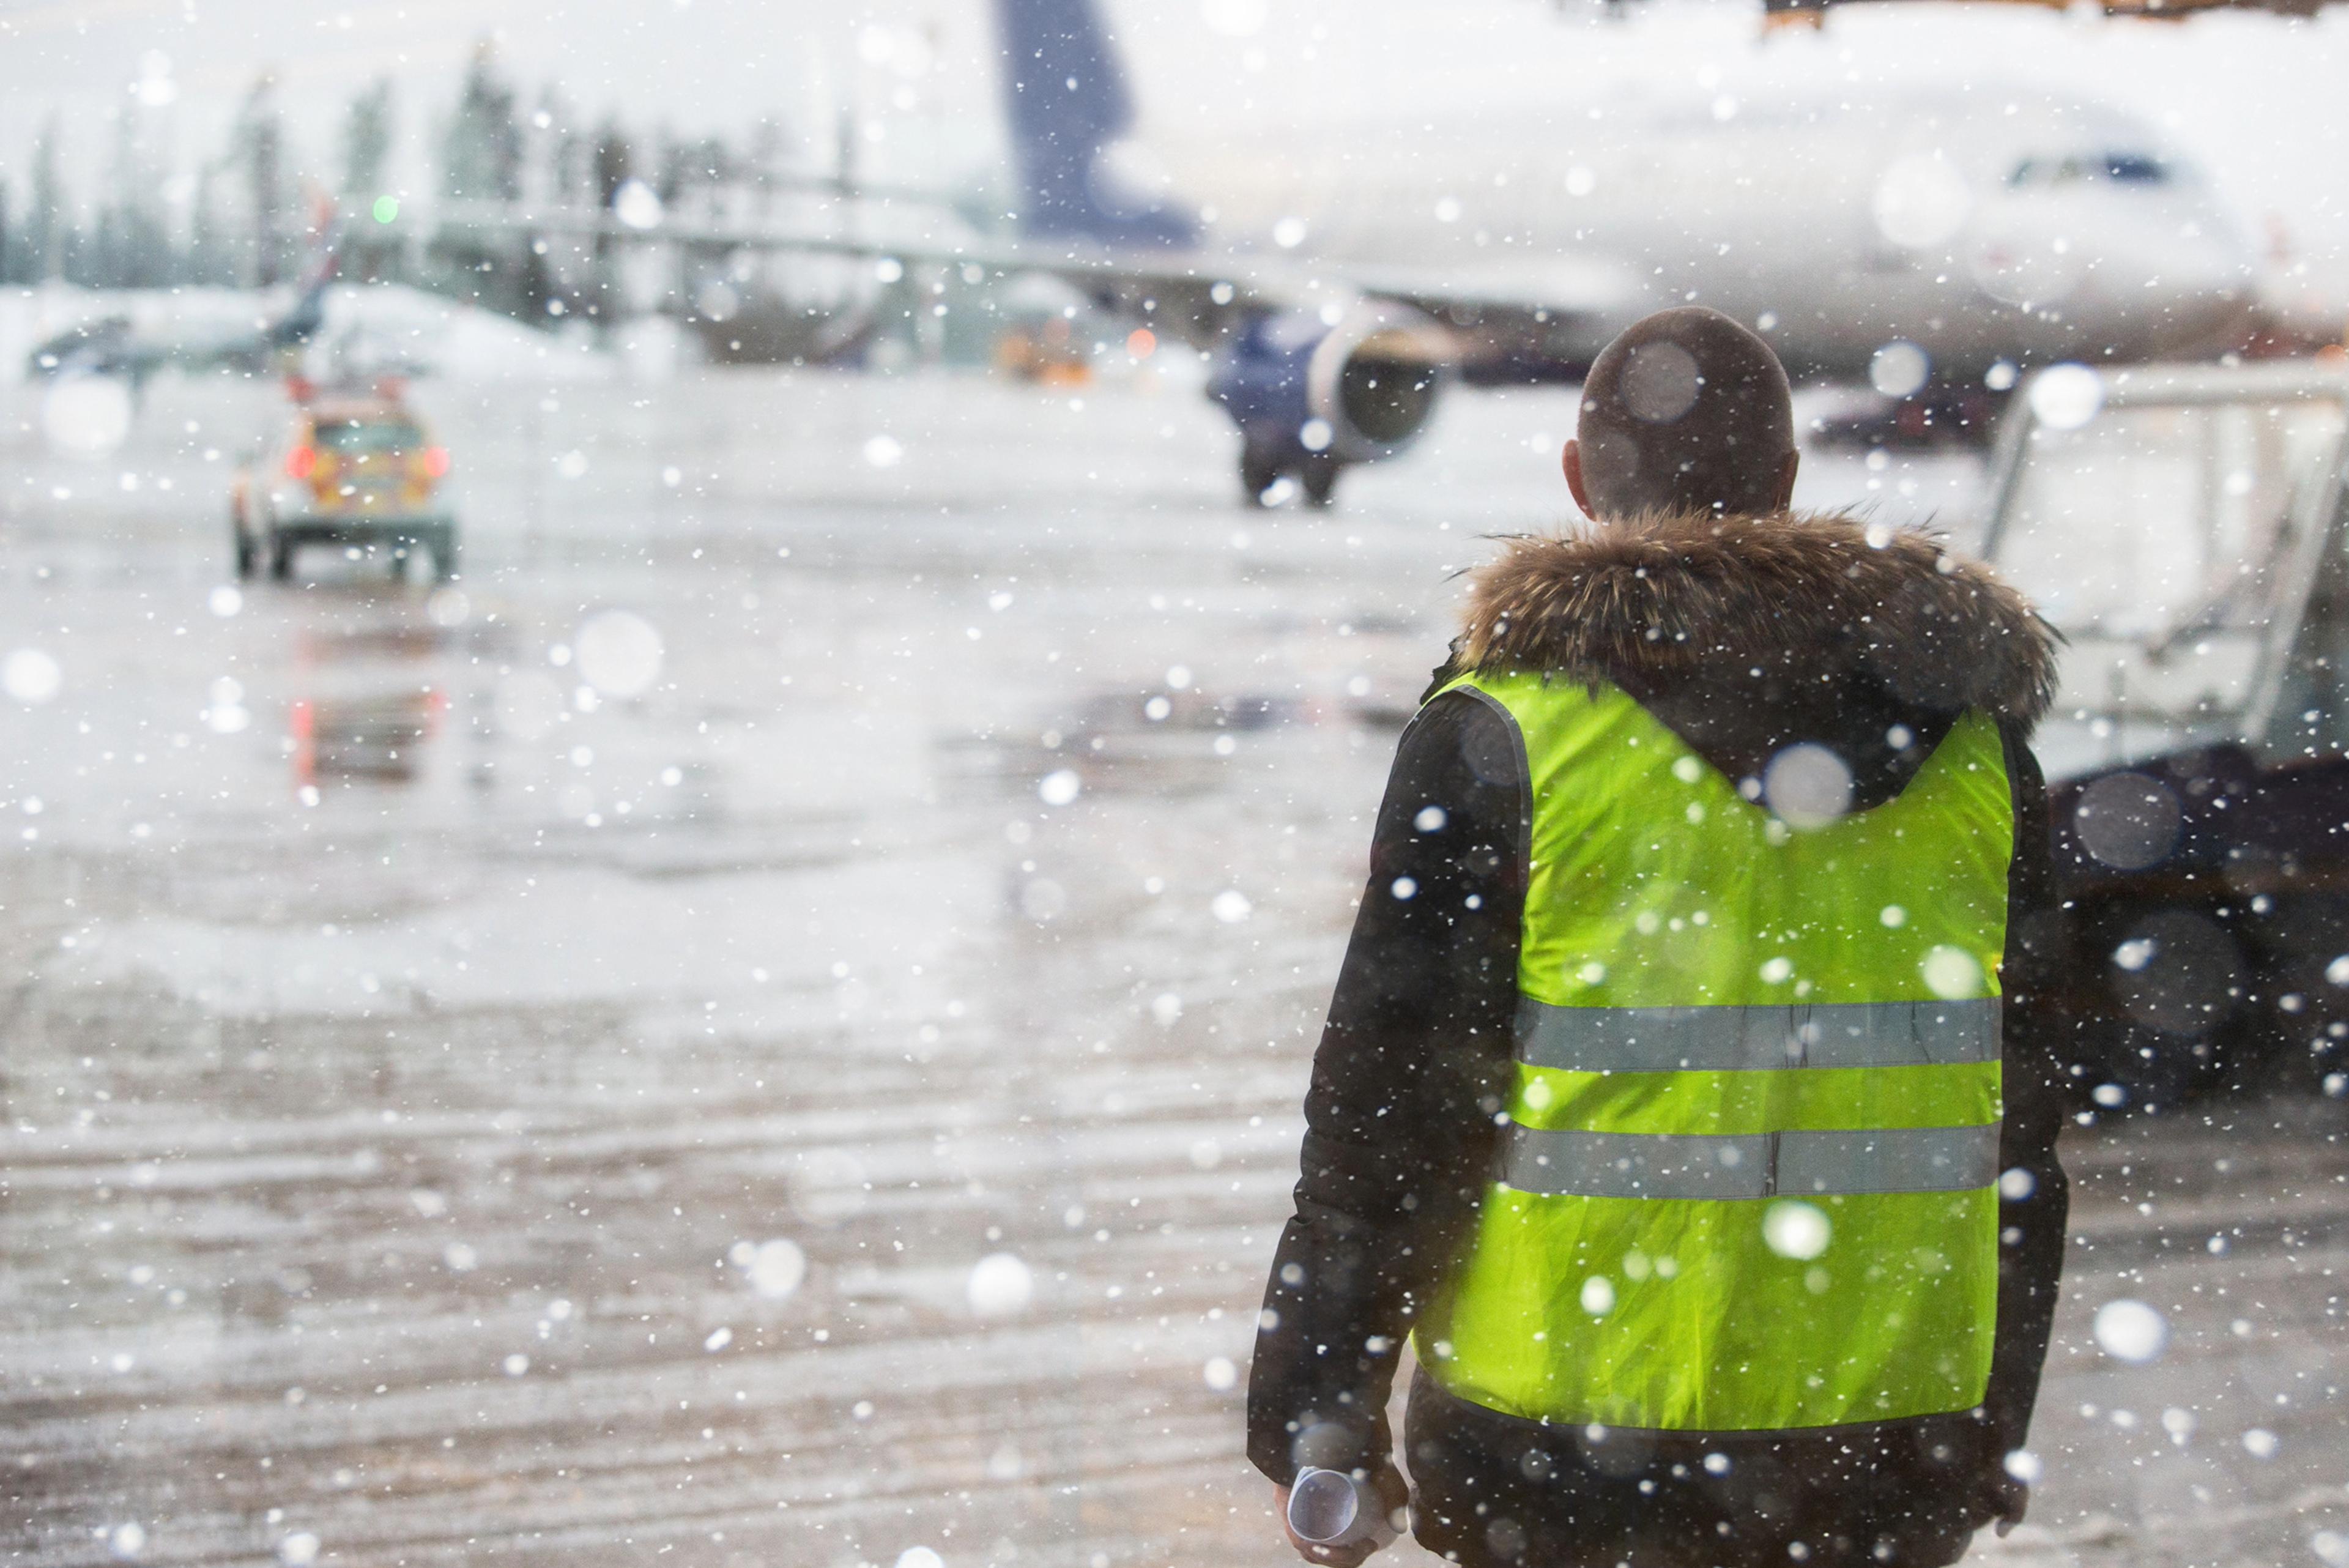 Rolls-Royce's Engine Environmental Protection team ensures engine resilience in extreme cold conditions, exemplifying the industry's commitment to air safety on a snowy runway